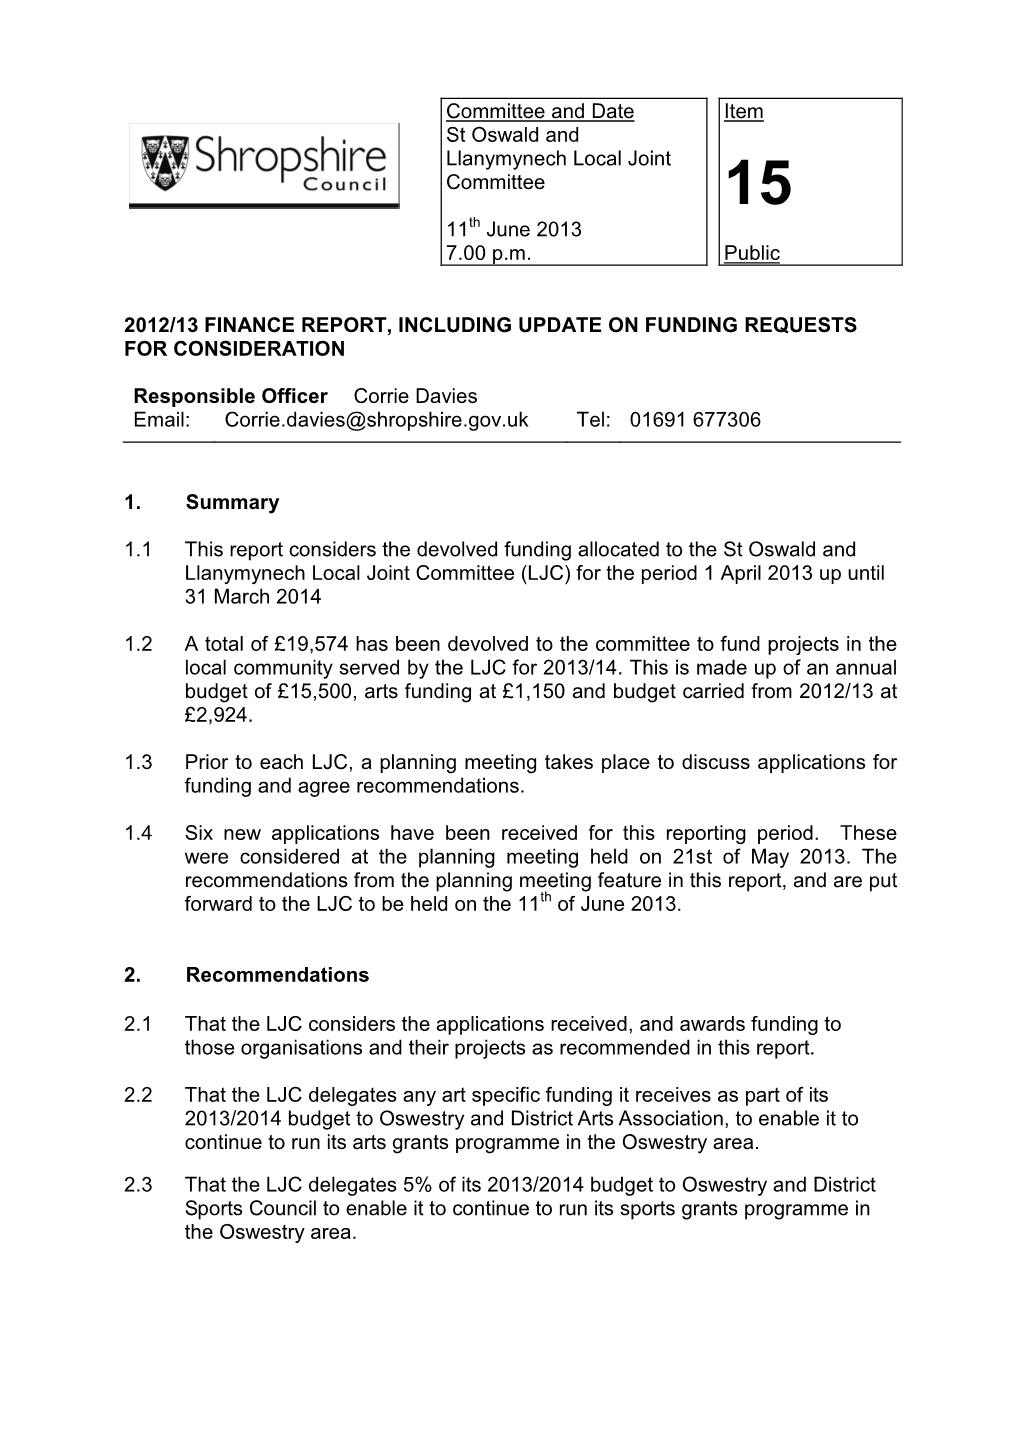 Committee and Date St Oswald and Llanymynech Local Joint Committee 11Th June 2013 7.00 P.M. Item Public 2012/13 FINANCE REPORT